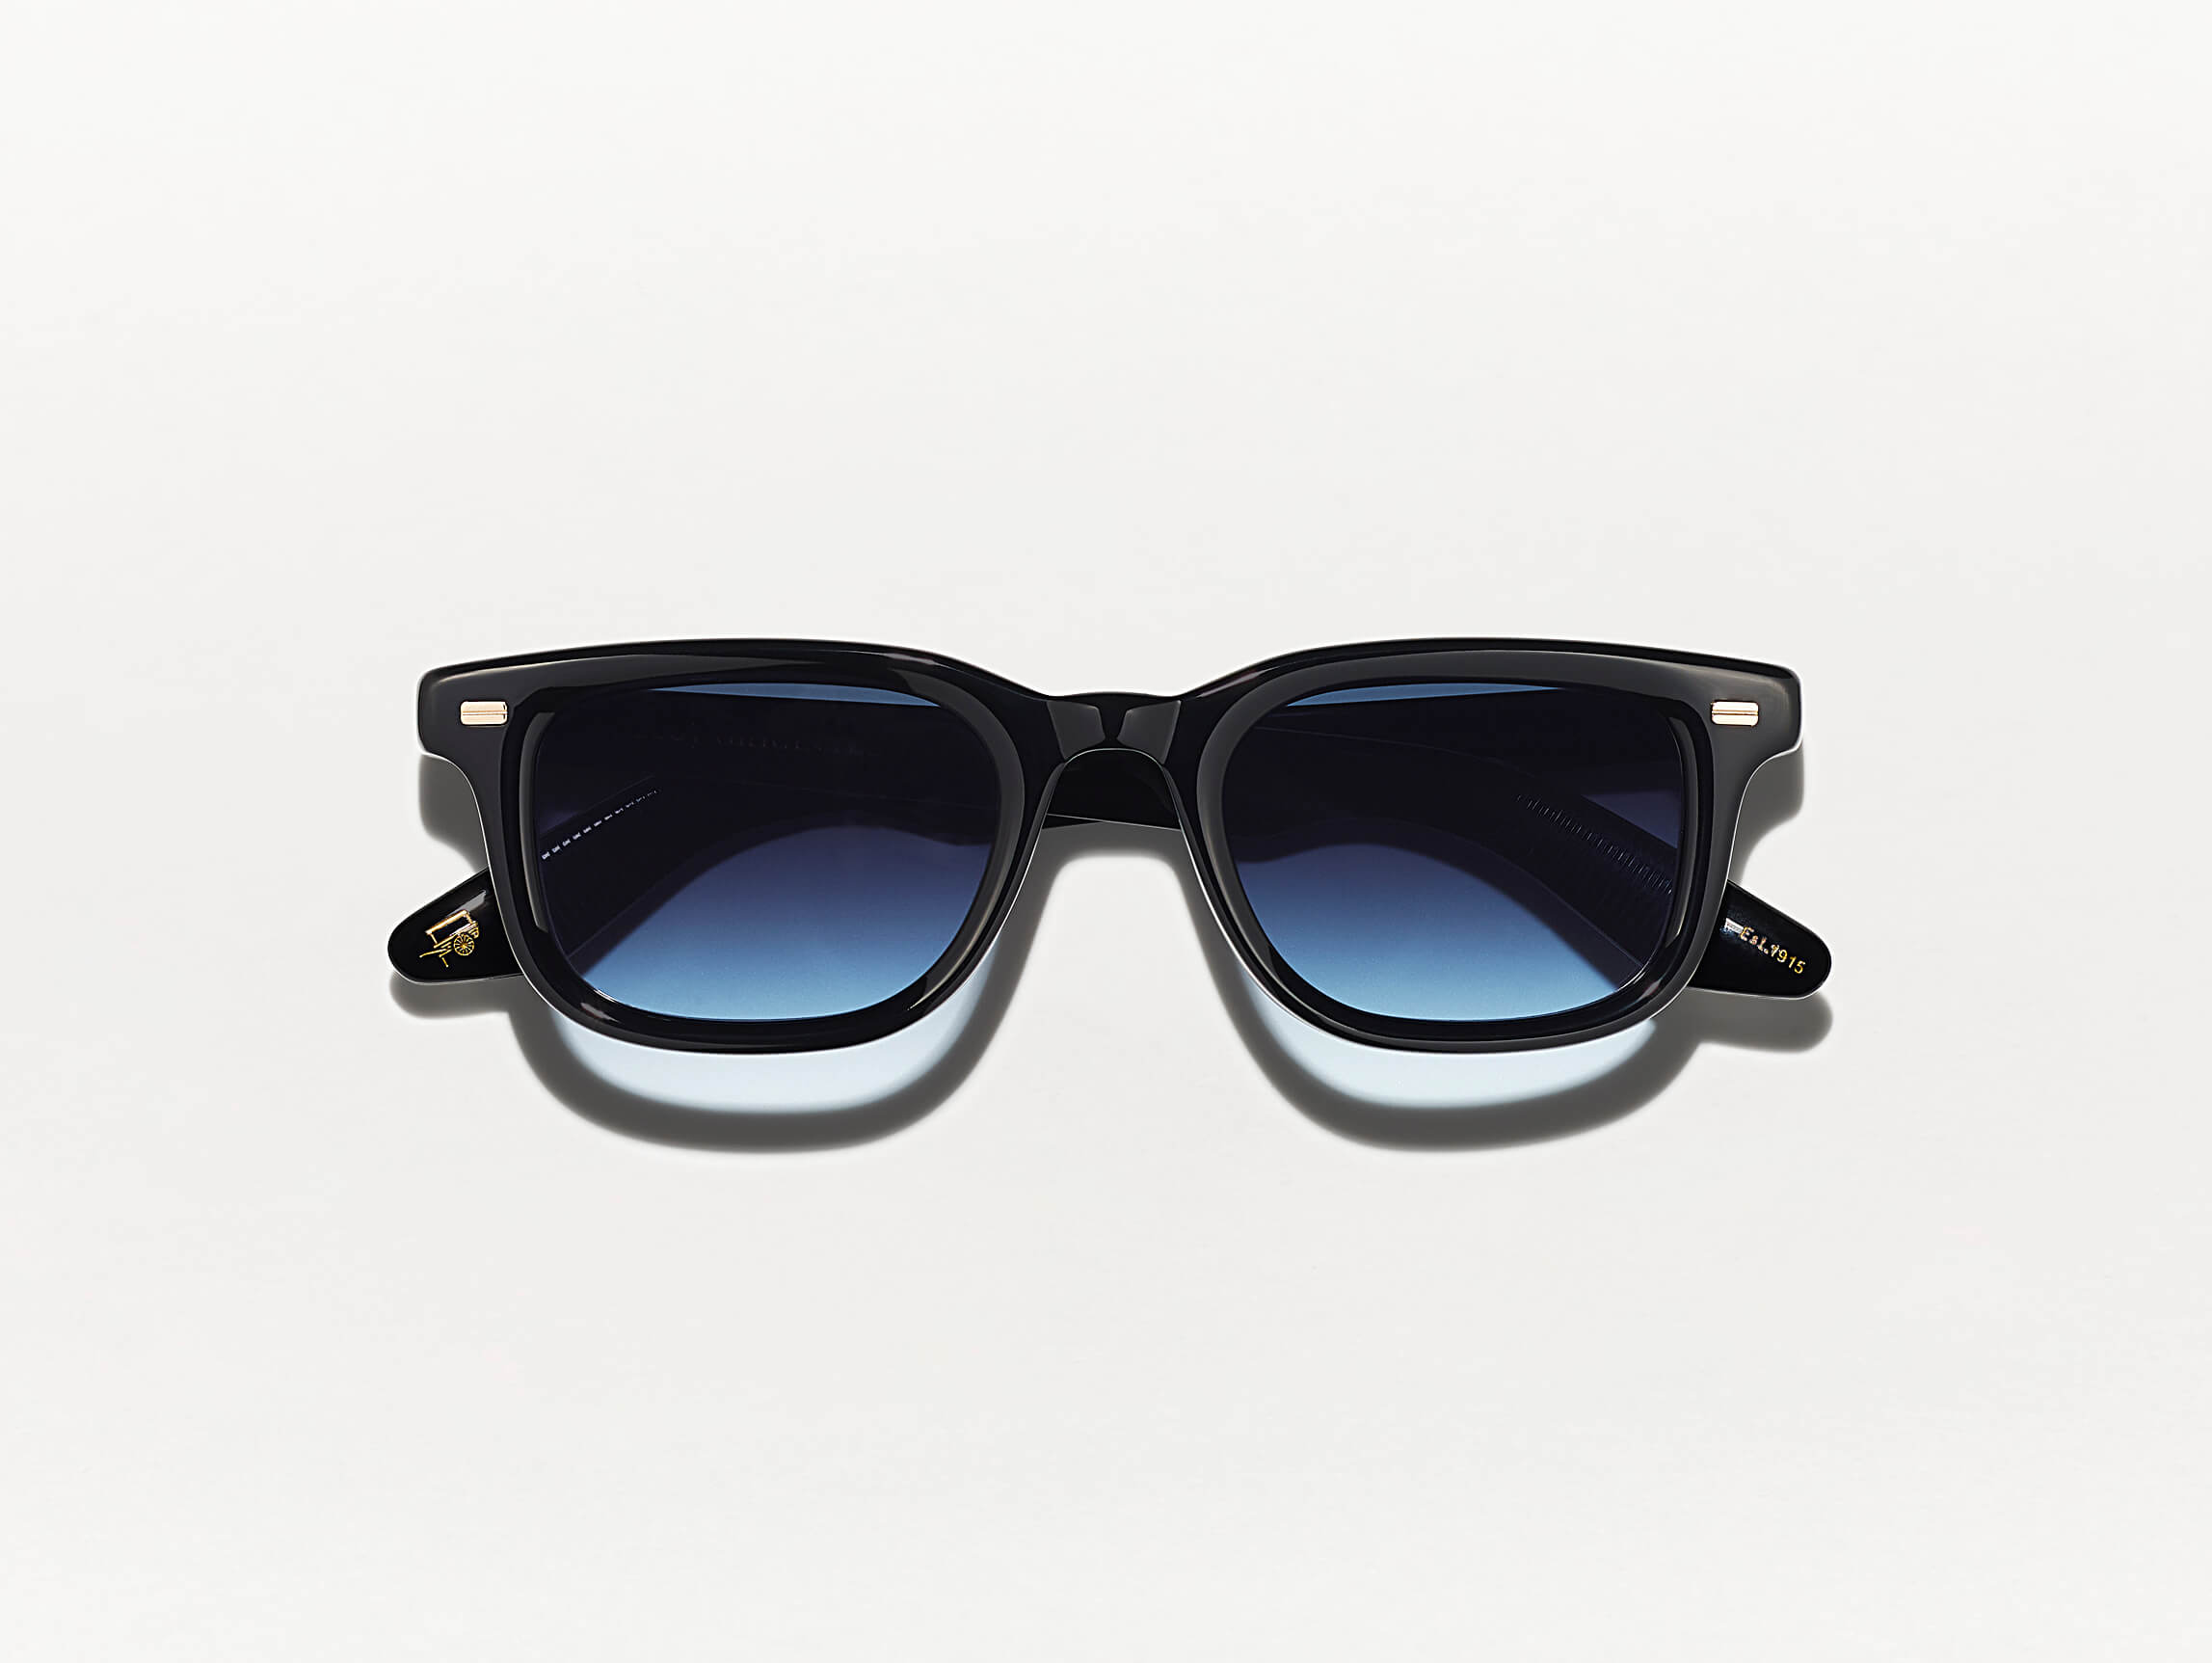 The KLUTZ SUN in Black with Denim Blue Tinted Lenses